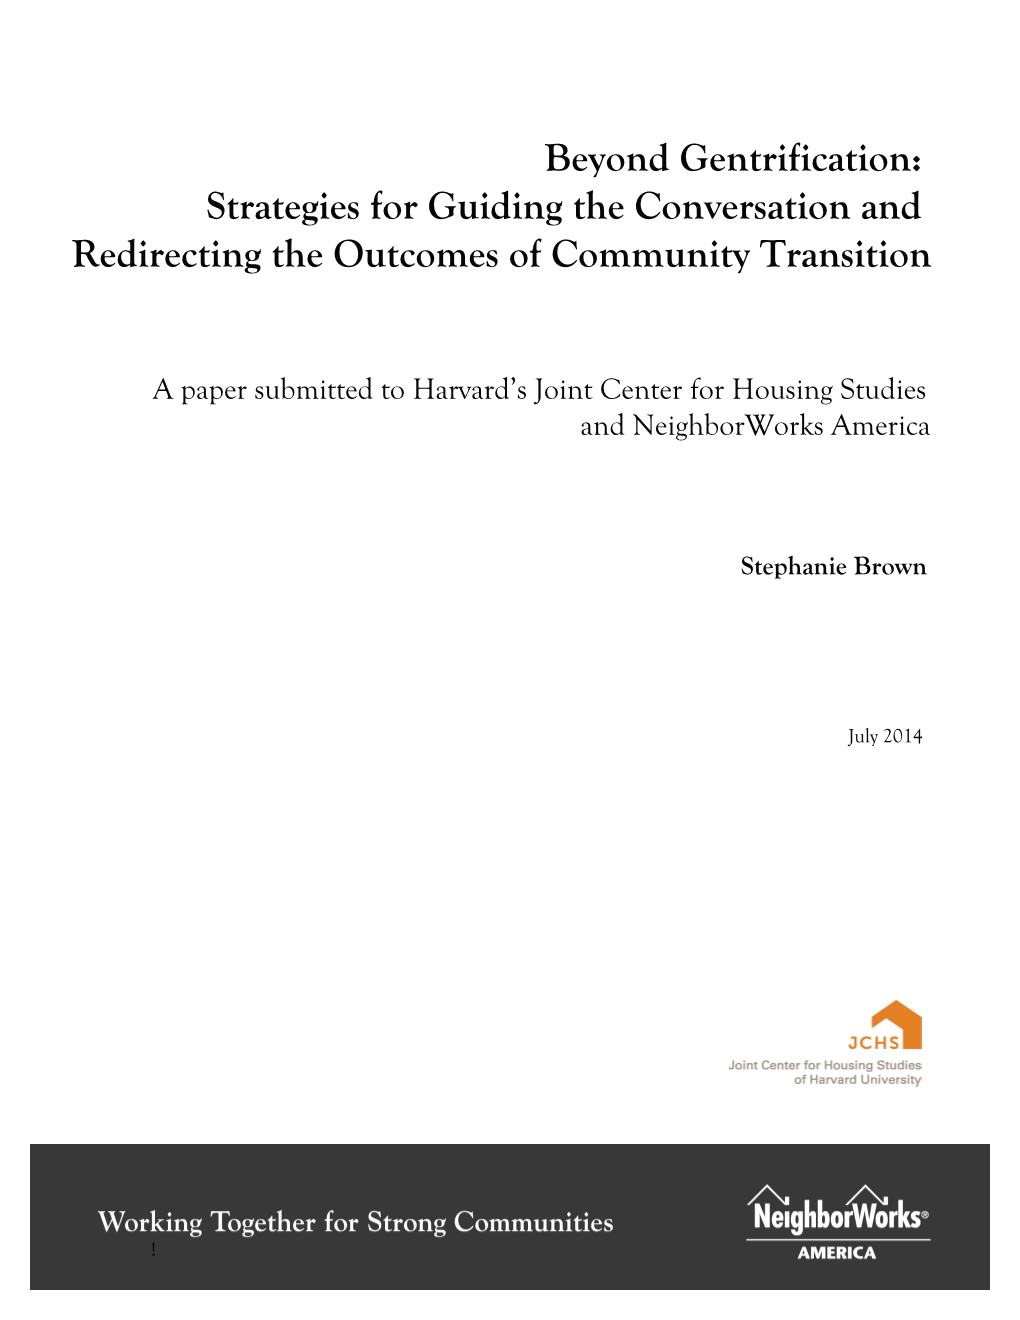 Beyond Gentrification: Strategies for Guiding the Conversation and Redirecting the Outcomes of Community Transition